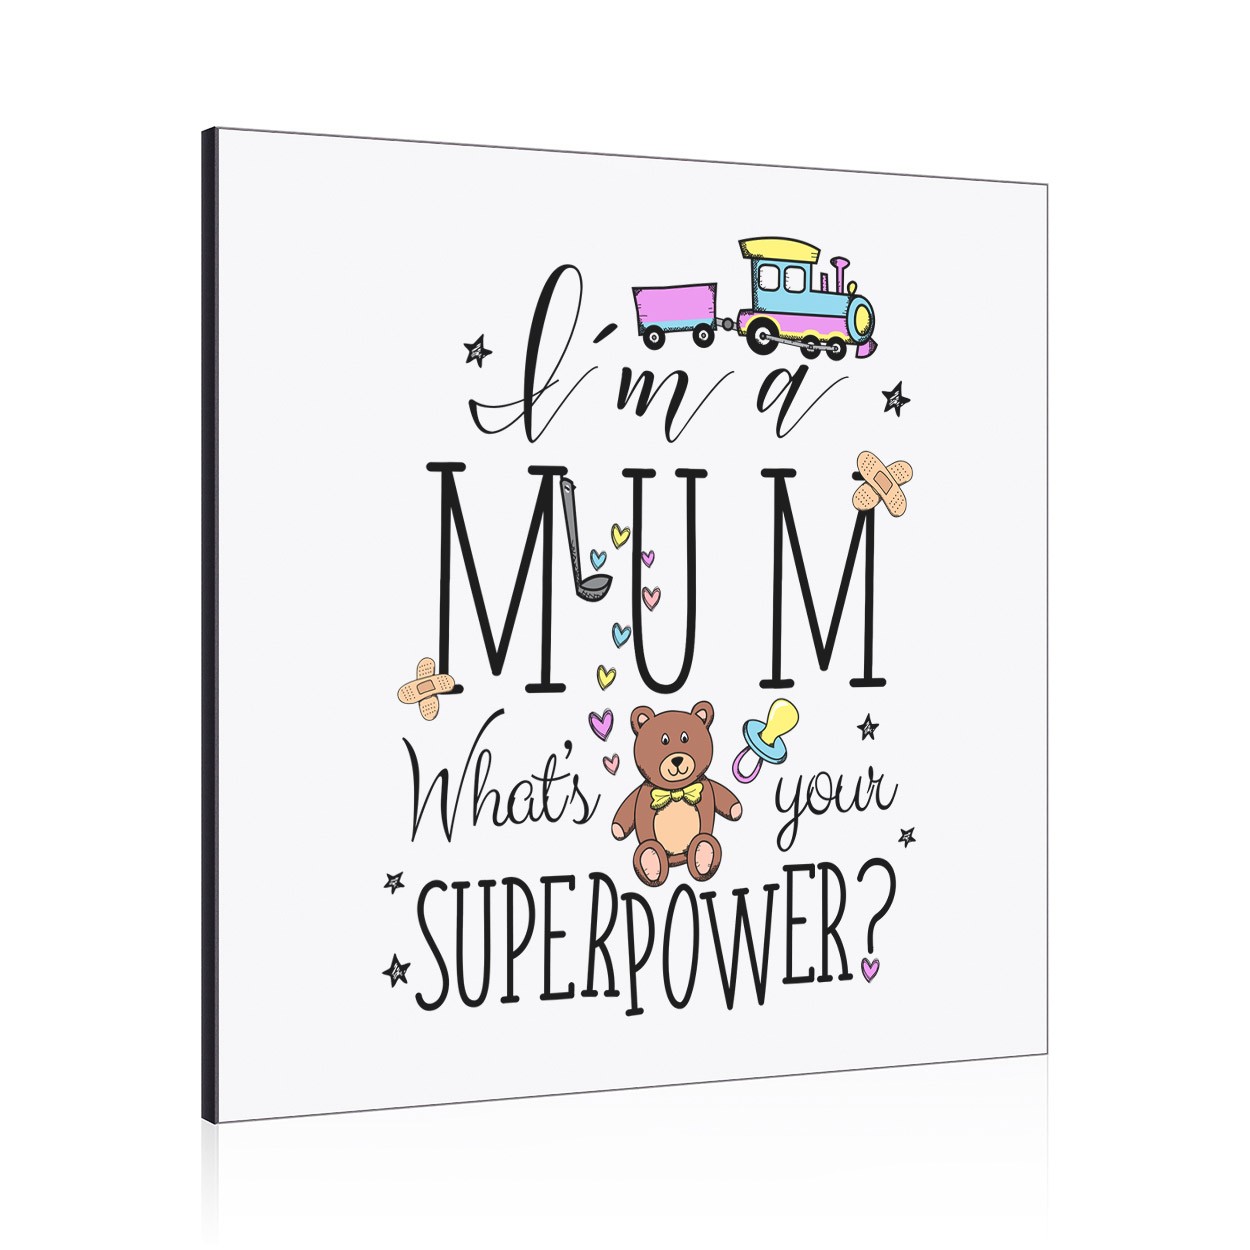 I'm A Mum What's Your Superpower Wall Art Panel